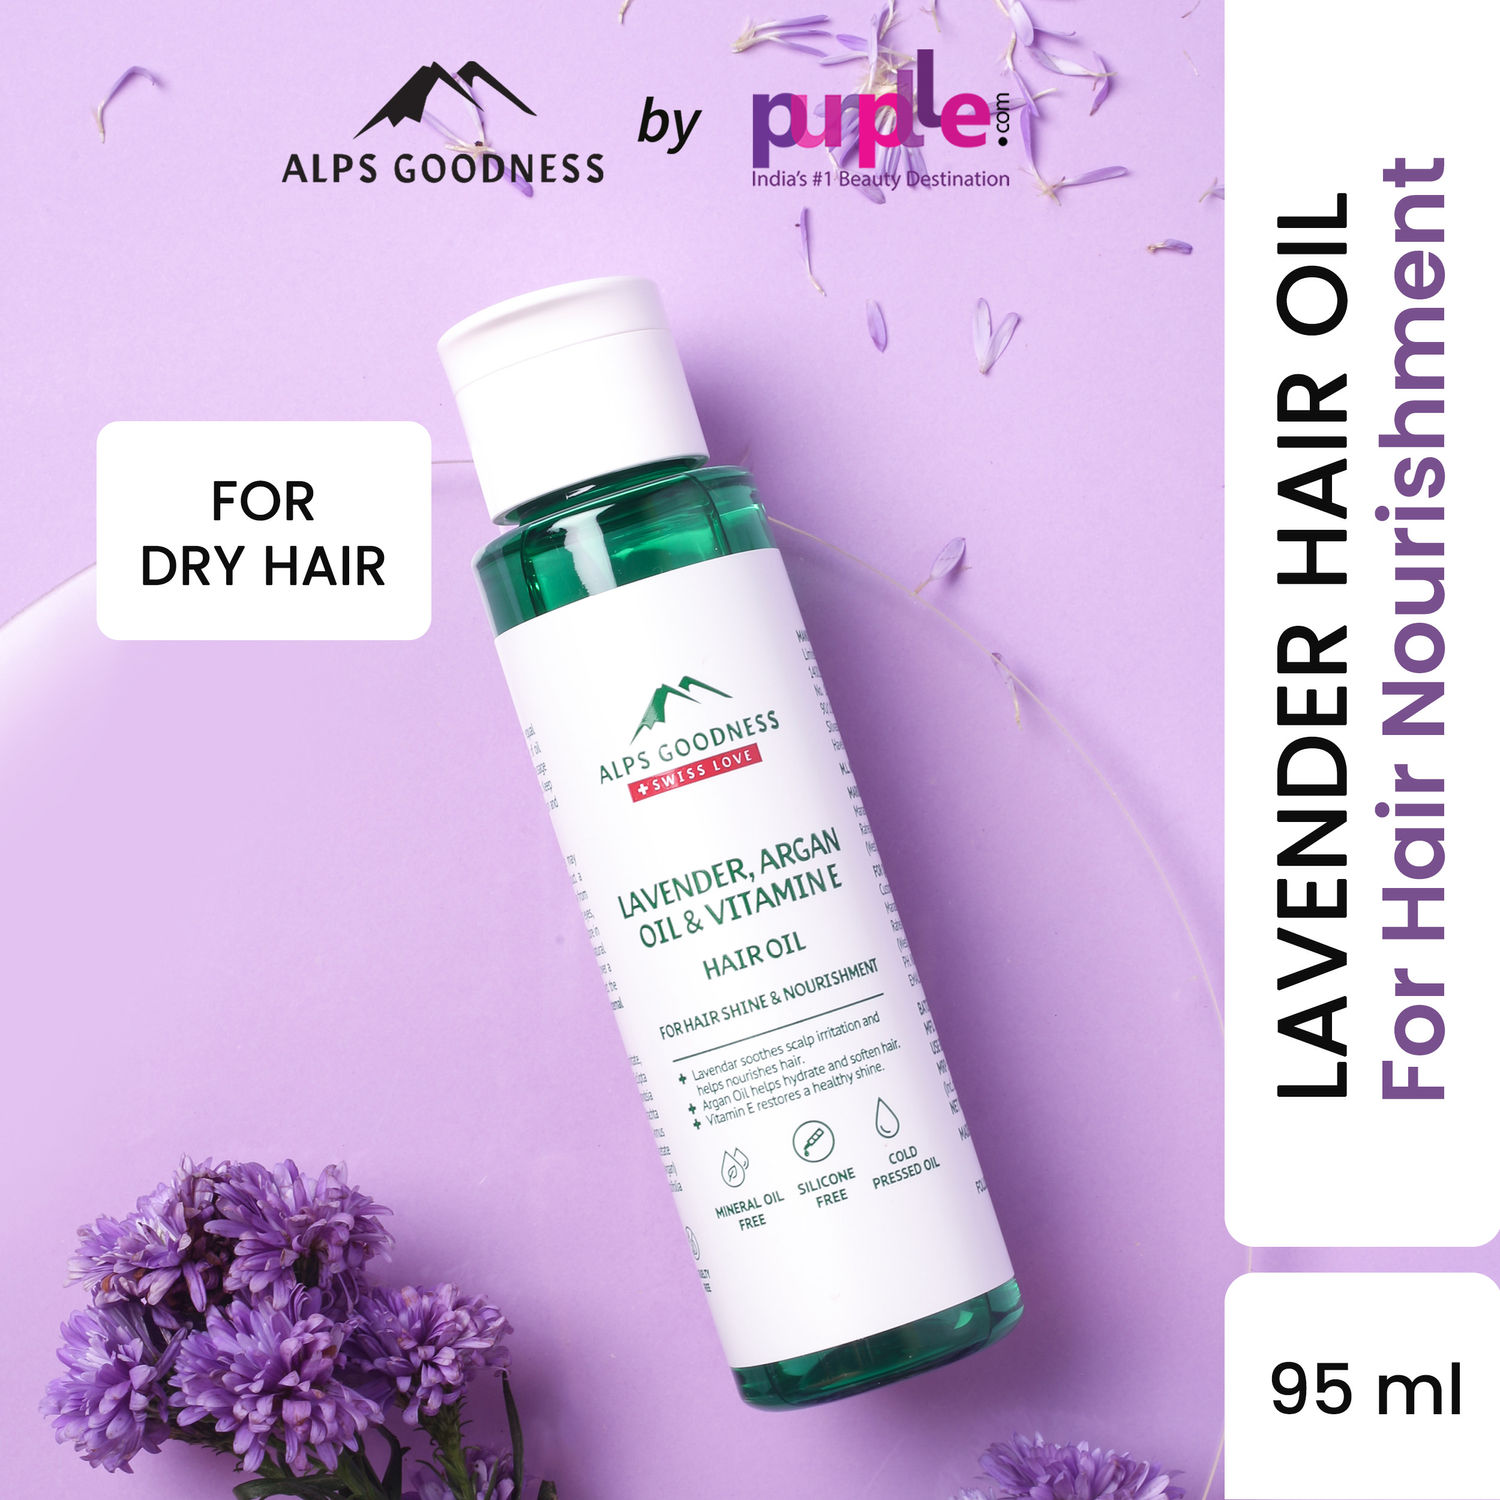 Buy Alps Goodness Lavender, Argan Oil & Vitamin E Hair Oil For Hair Shine & Nourishment (95 ml)| Lightweight Oil| Light oil for everyday use| Silicone Free, Sulphate Free, Mineral Oil Free, Vegan, Cruelty Free - Purplle